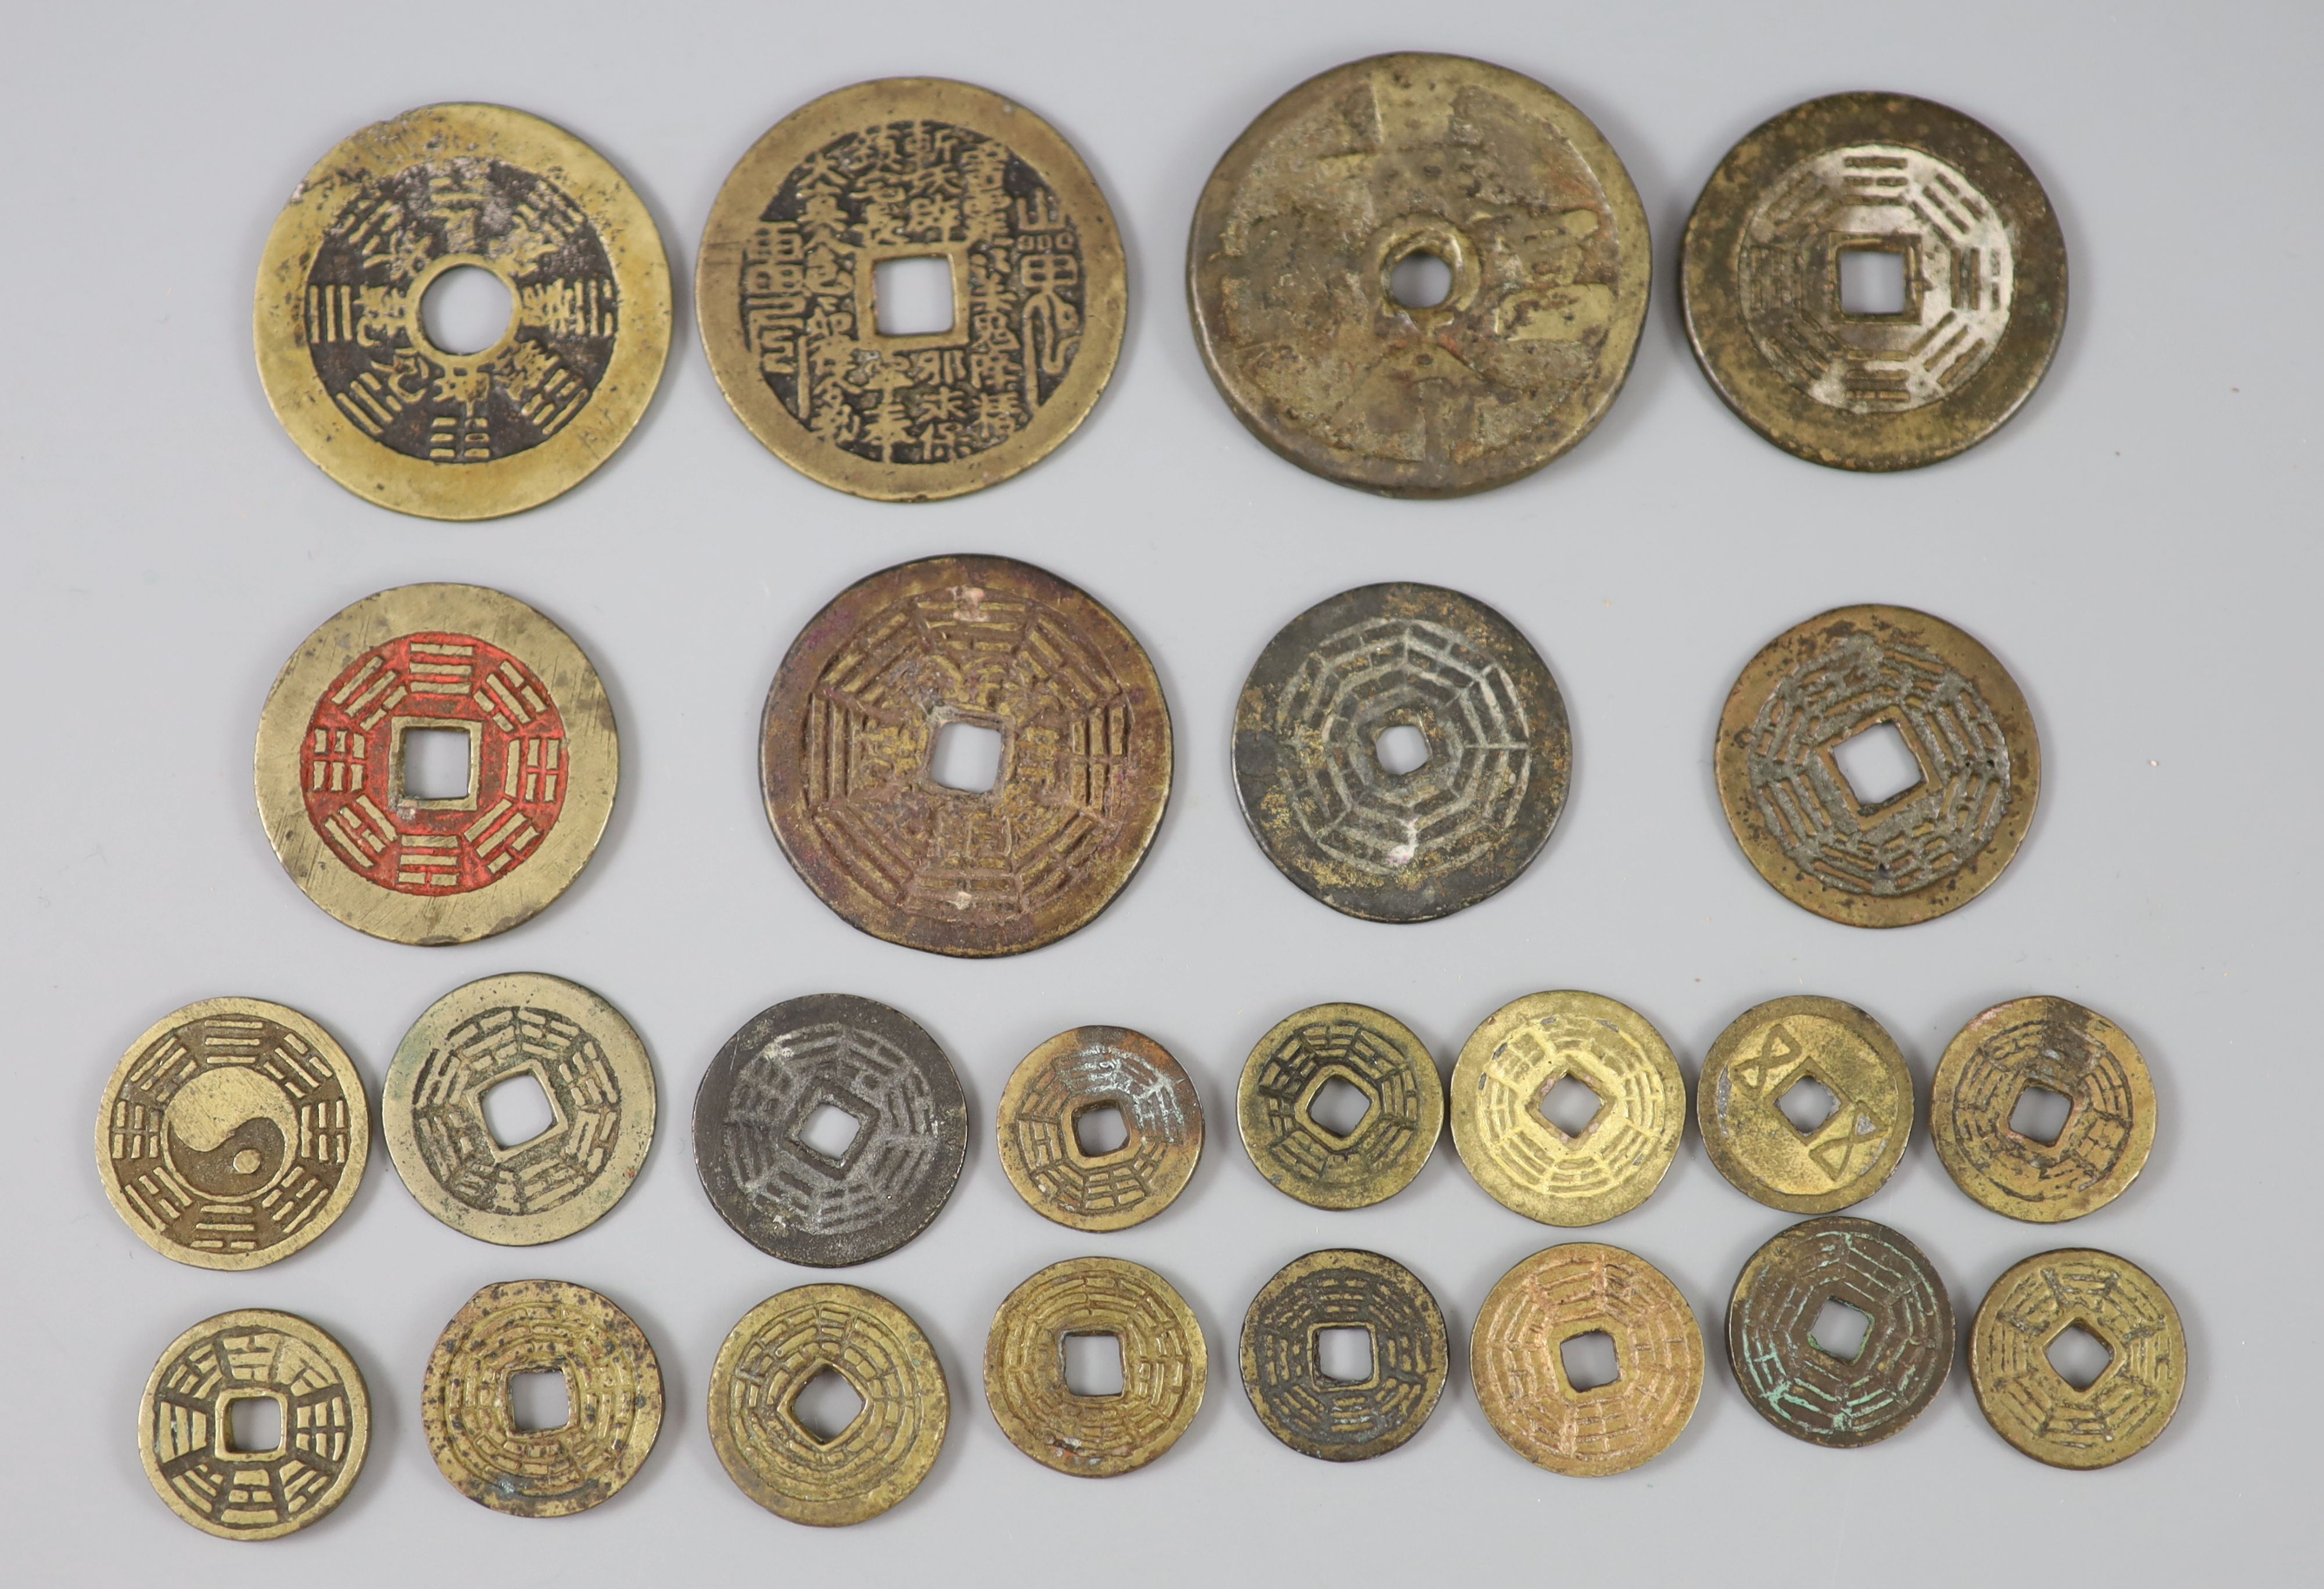 China, 24 bronze charms or amulets, Qing dynasty,